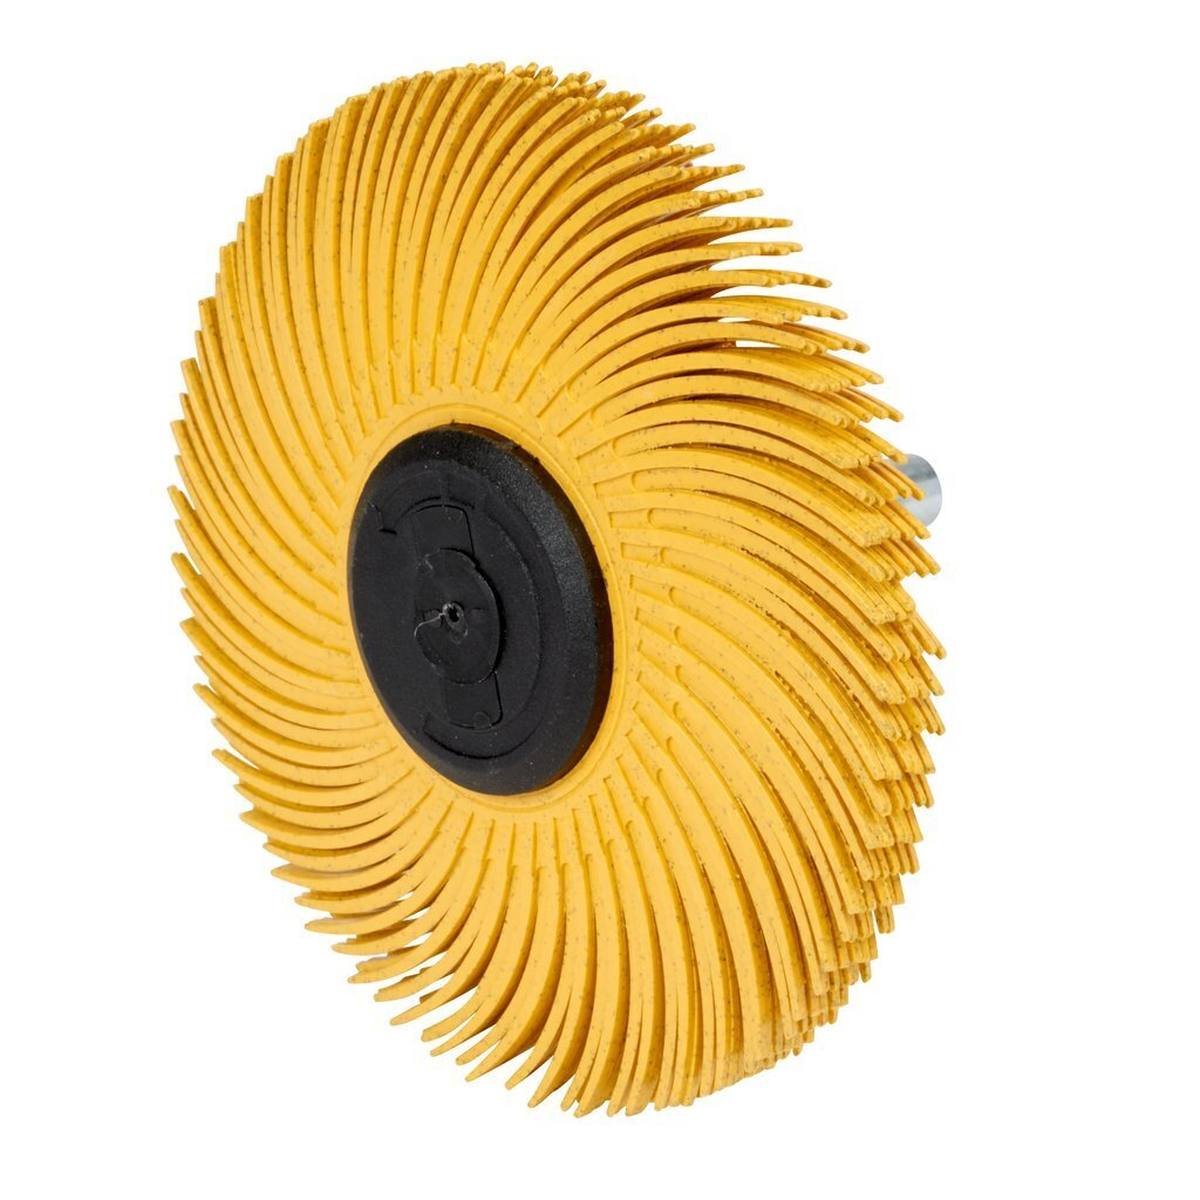 3M Scotch-Brite Radial Bristle Disc BB-ZS with shaft, yellow, 76.2 mm, P80, type C #62968